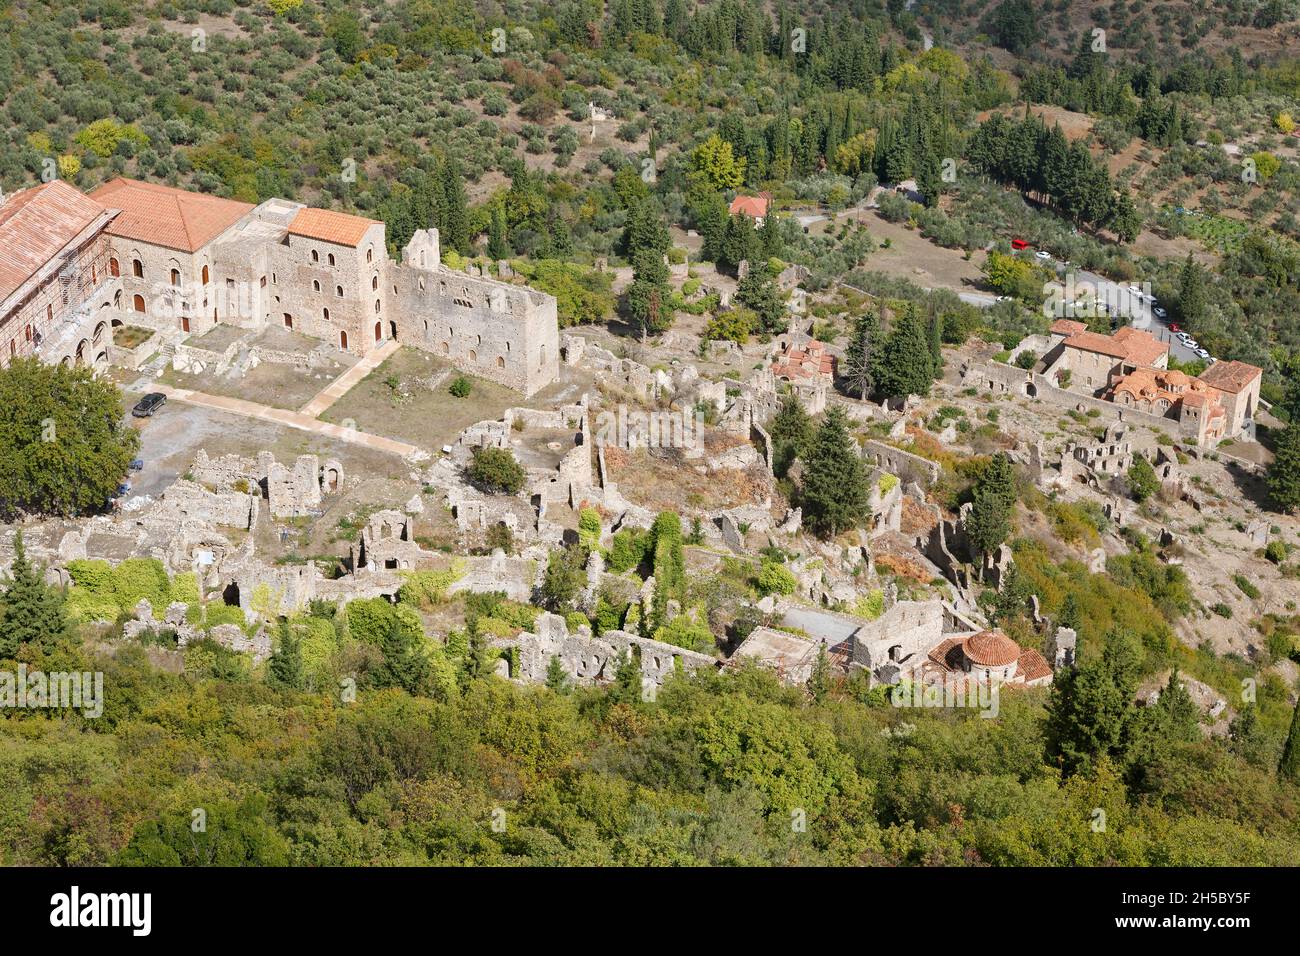 View looking down on the upper and lower historic fortified city of Mystras in the Peloponnese of Greece Stock Photo